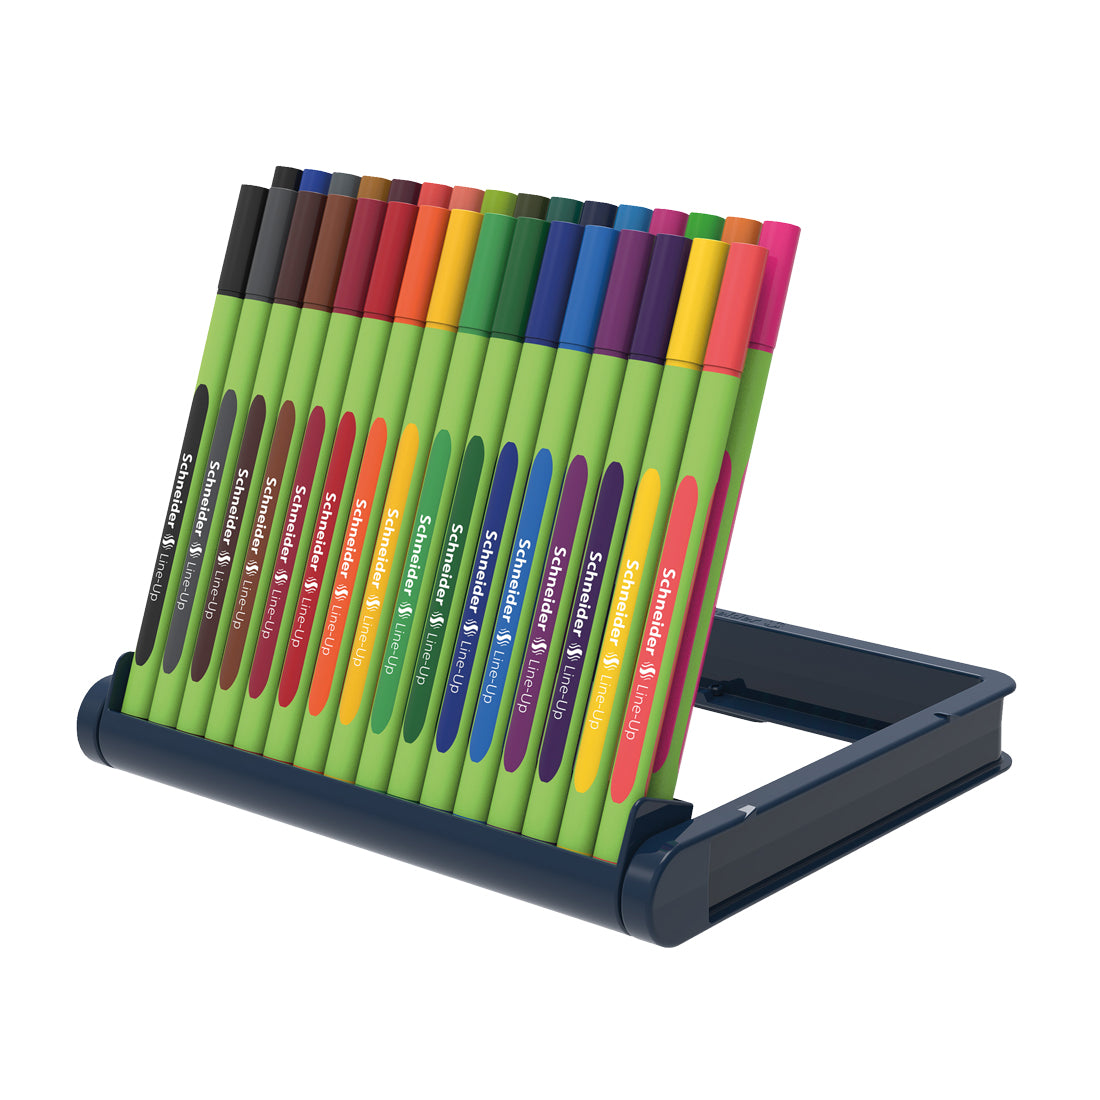 Line-Up Fineliners 0.4mm with Case stand, 32 pieces